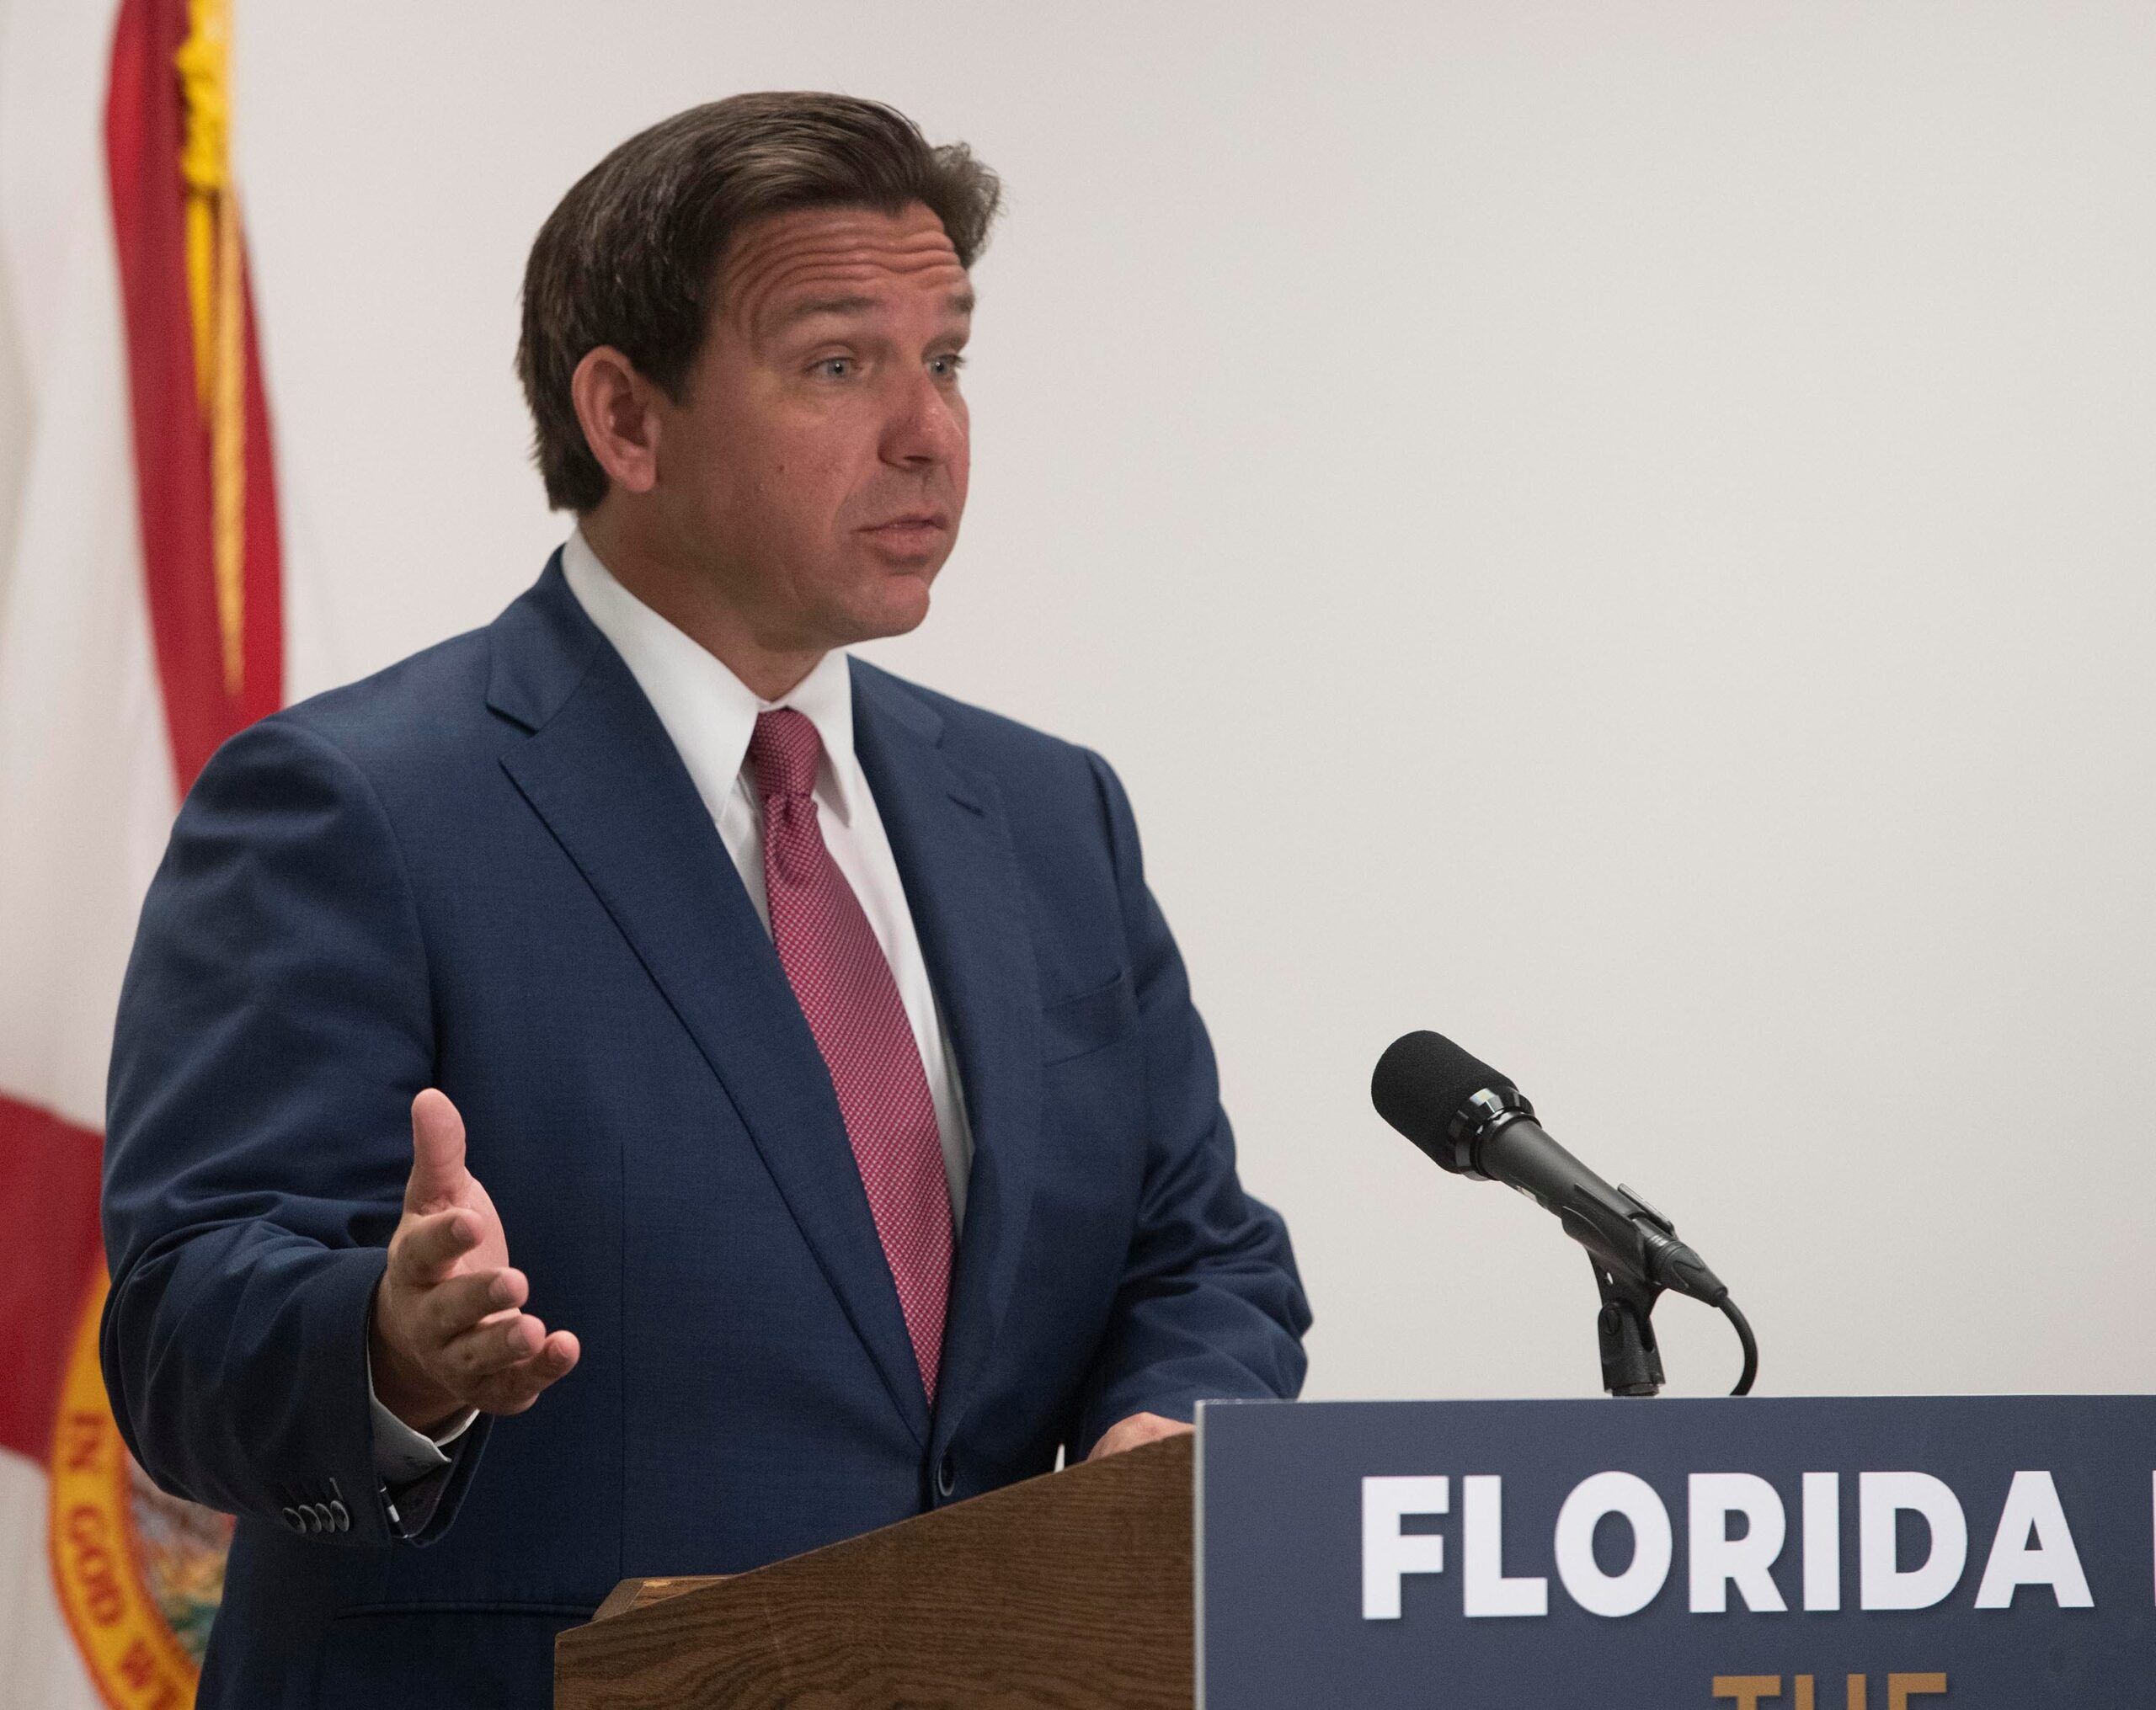 Governor Ron DeSantis visits Pensacola’s Warrington Preparatory Academy to discuss the passage of HB1285. The bill will beef up turnaround schools, restrict book challenges, and allow for military-friendly schools or Purple Star school districts.